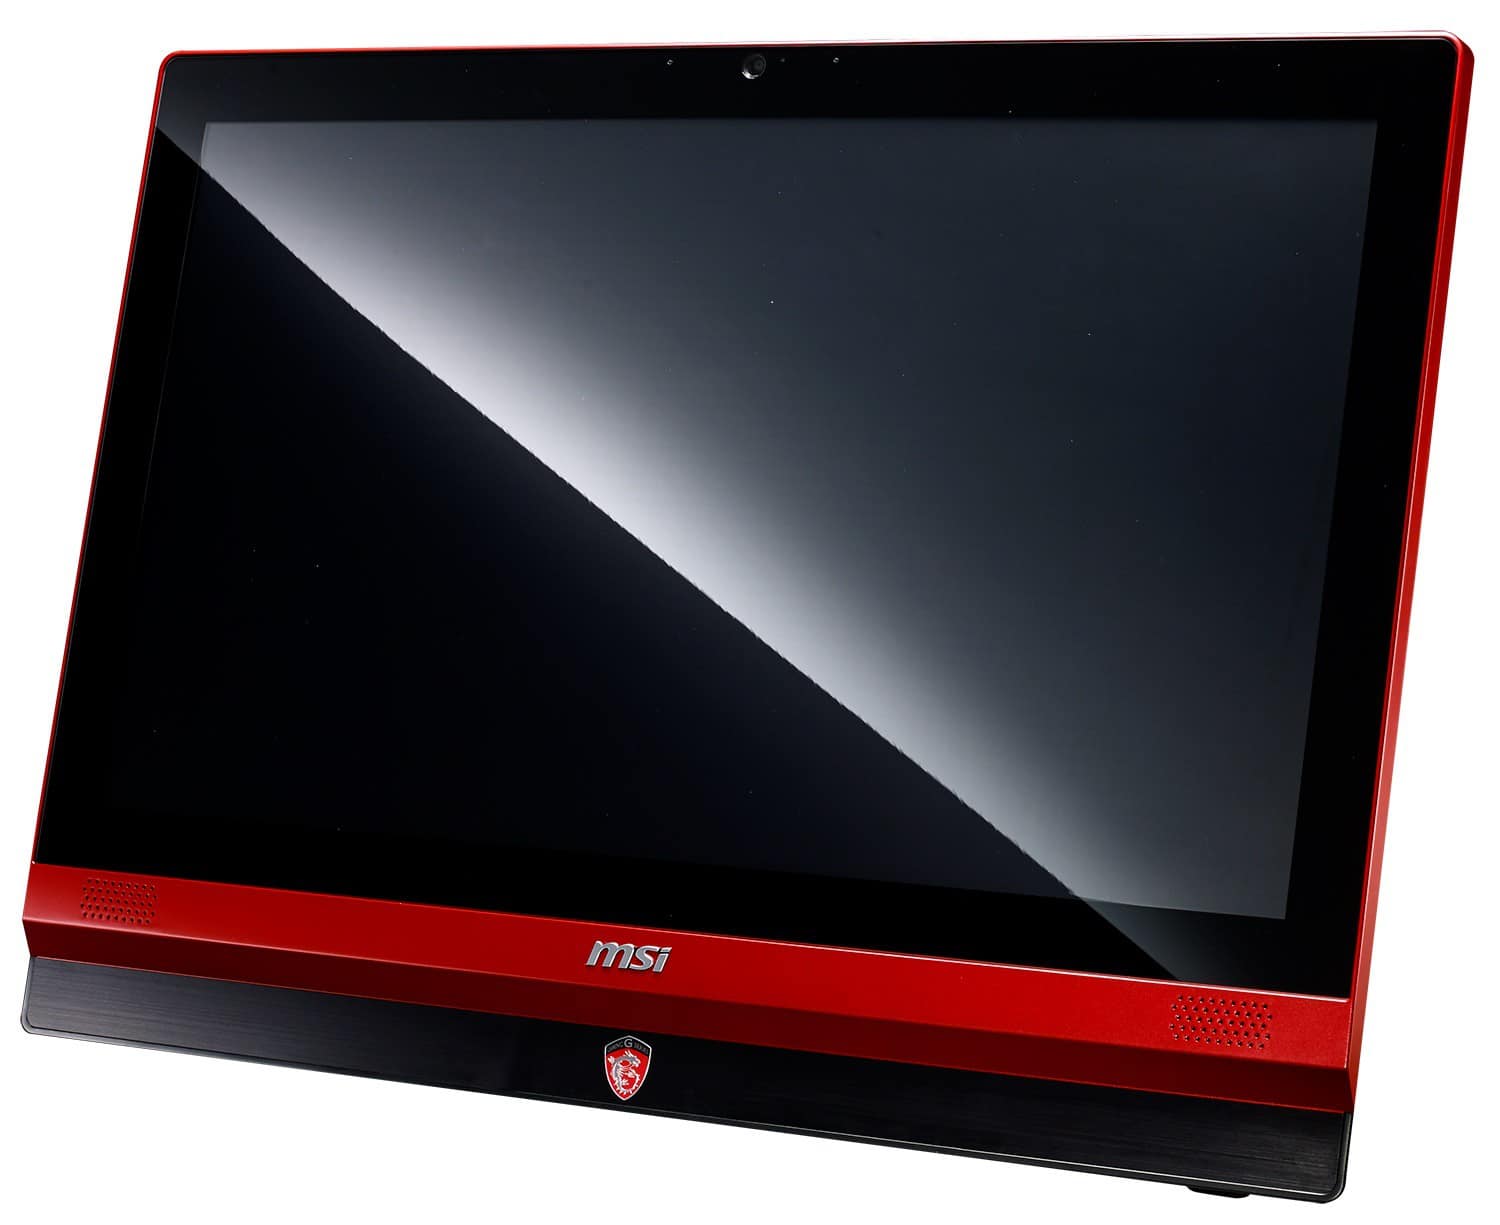 Gaming all in ones. Моноблок MSI ag220. Моноблок MSI красный. MSI ag270 2ql-215ru. Моноблок MSI 27 дюймов.